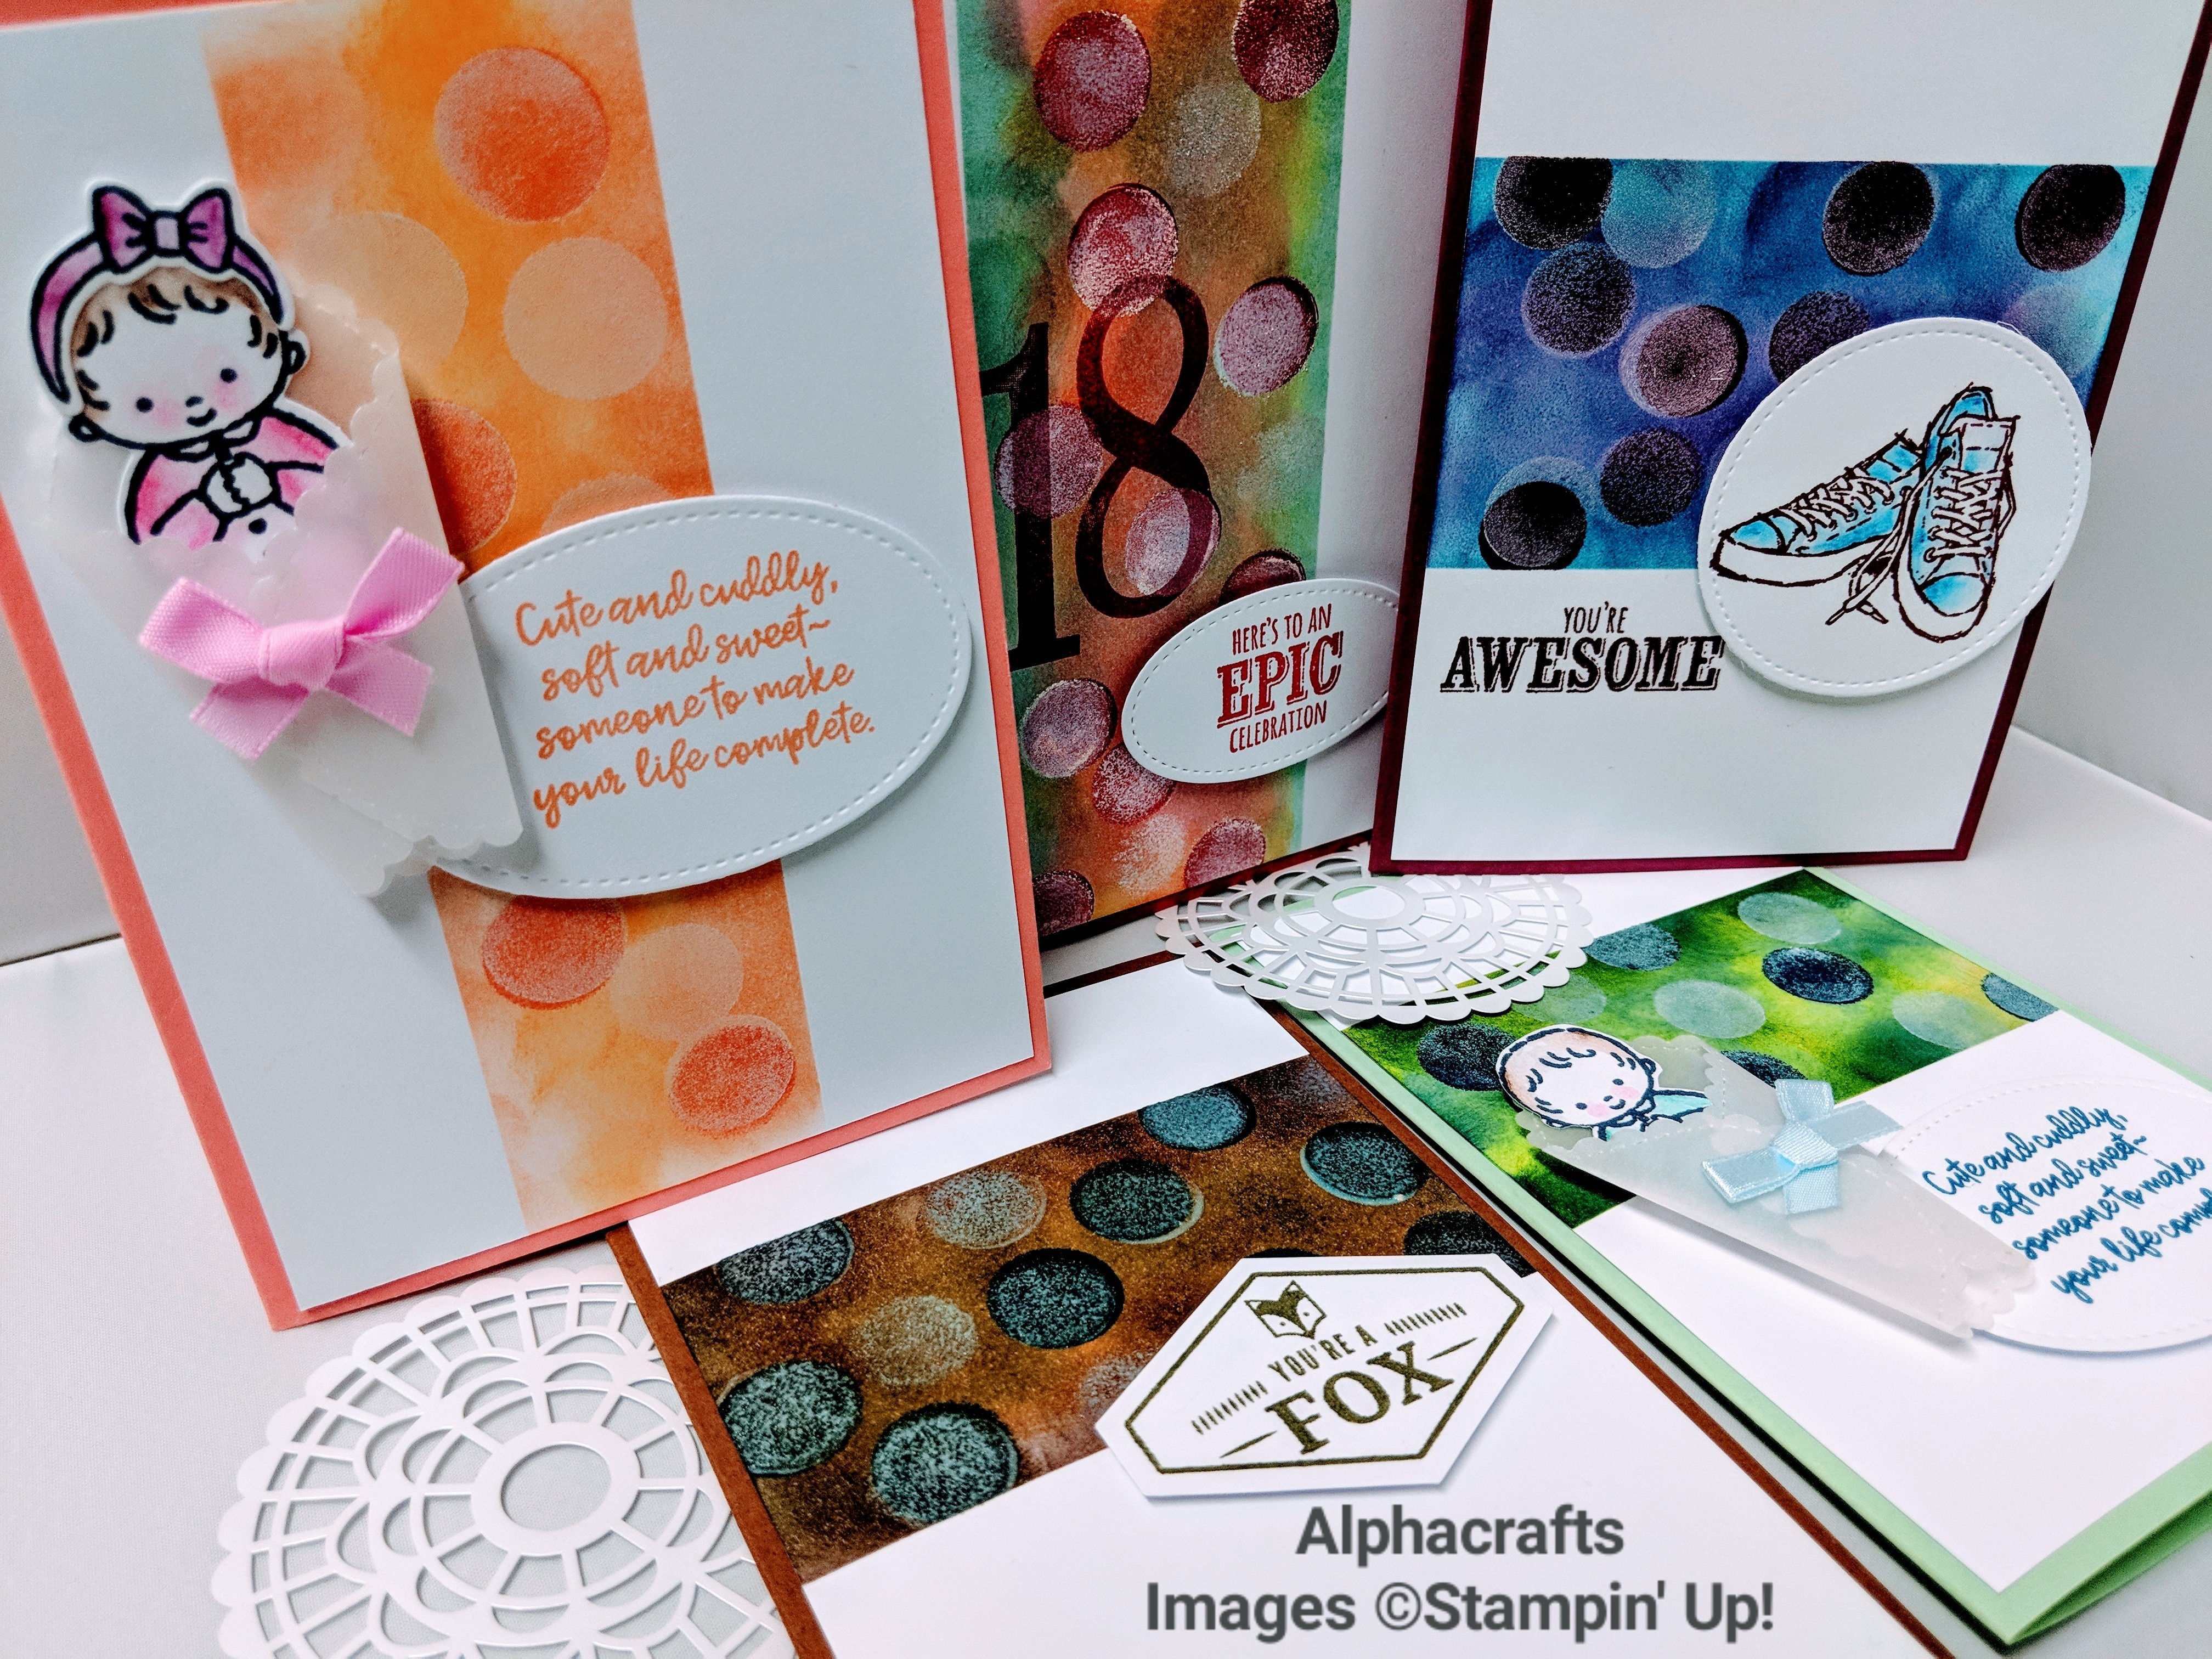 Image of cards showing Bokeh technique using sponge daubers and ink to create the dots